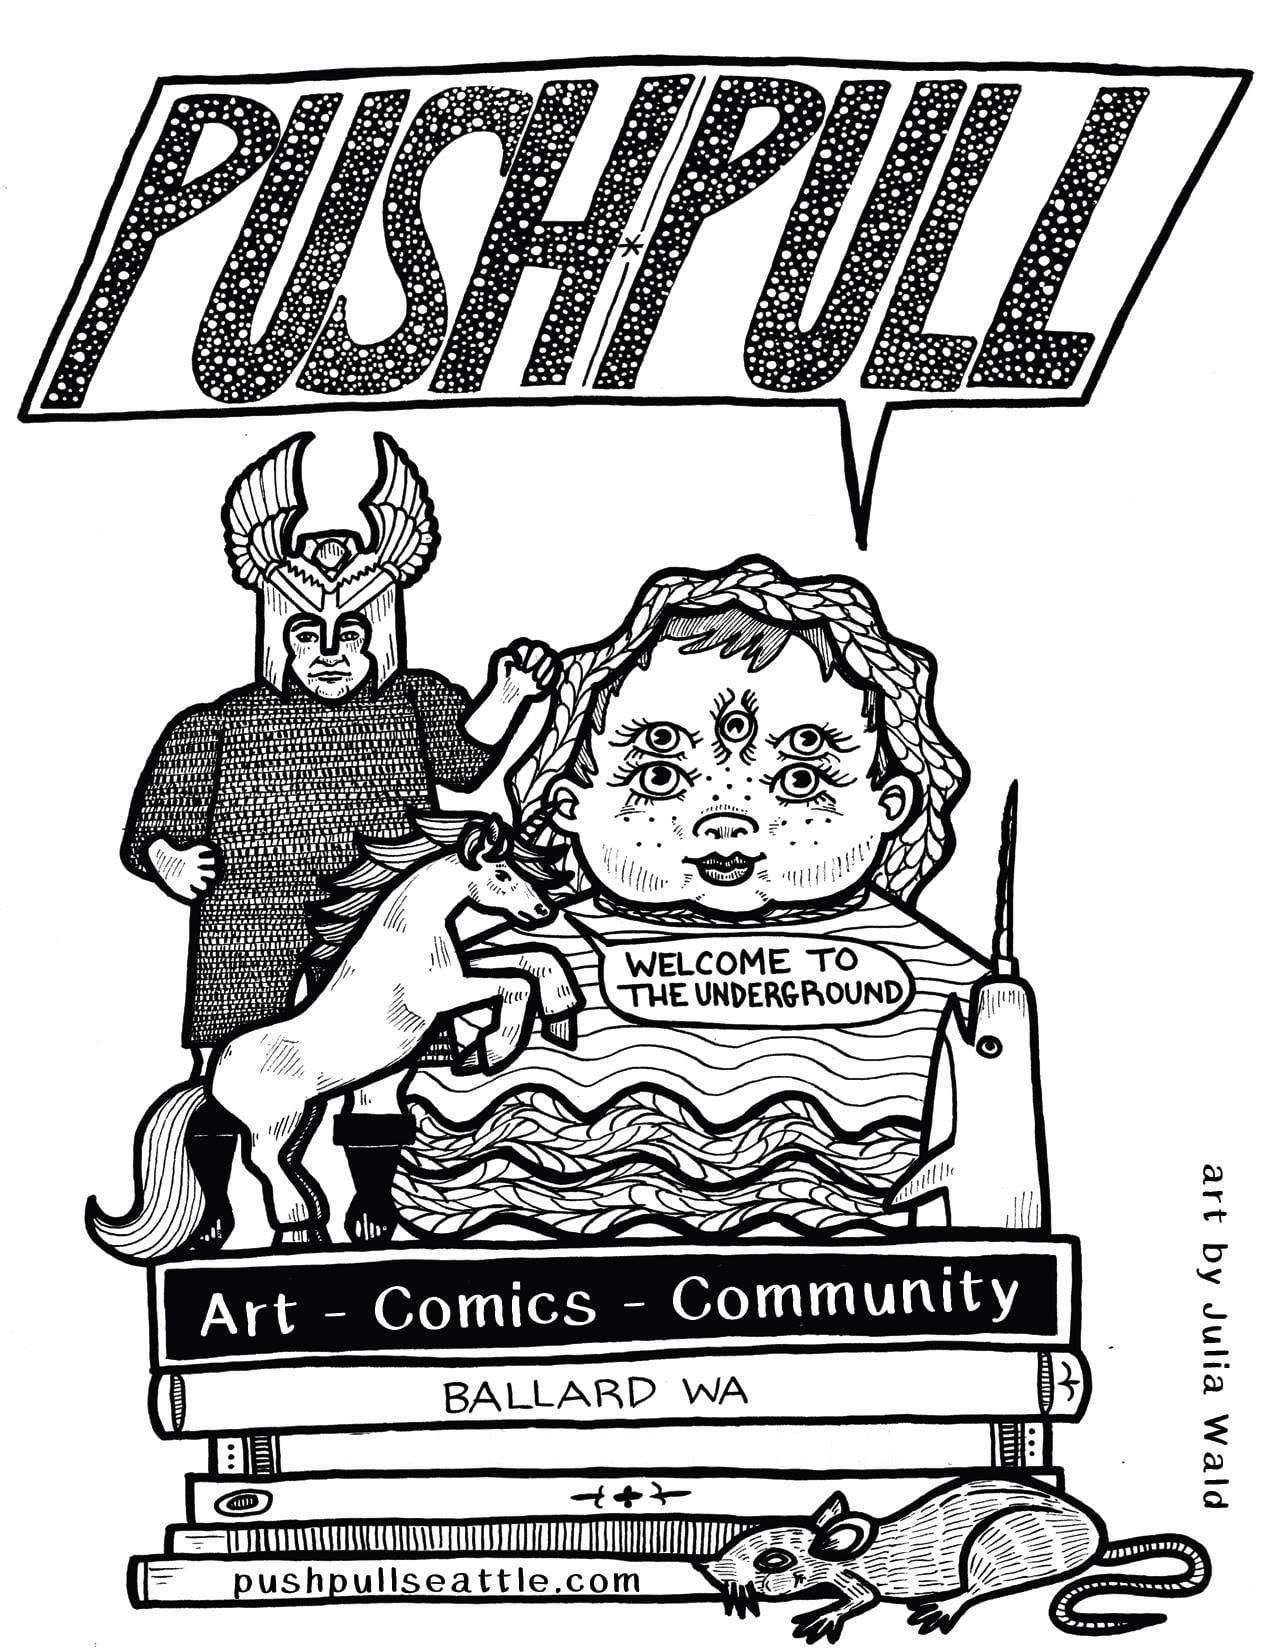 Poster Promoting Push/Pull 